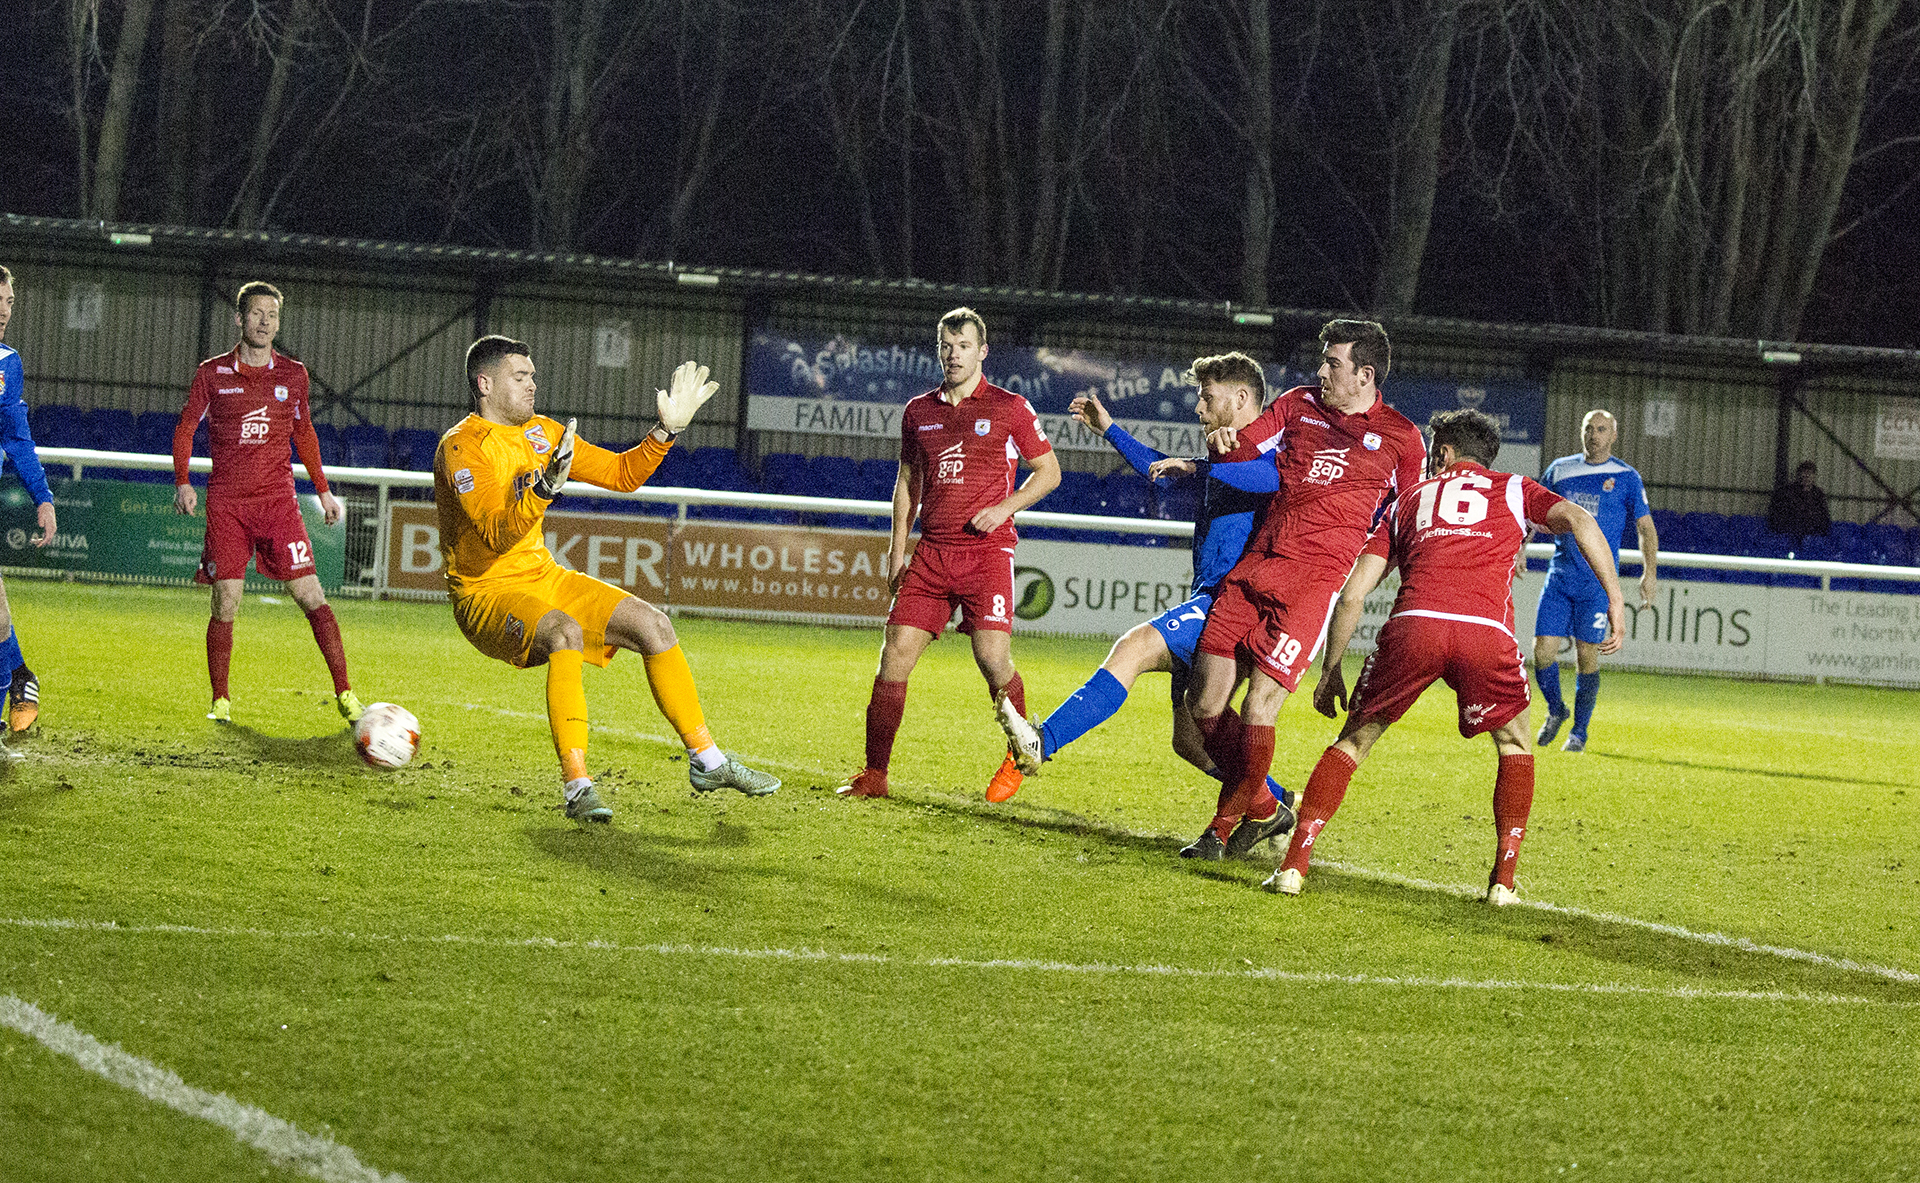 Matty Owen strikes for The Nomads in the 59th minute - © NCM Media